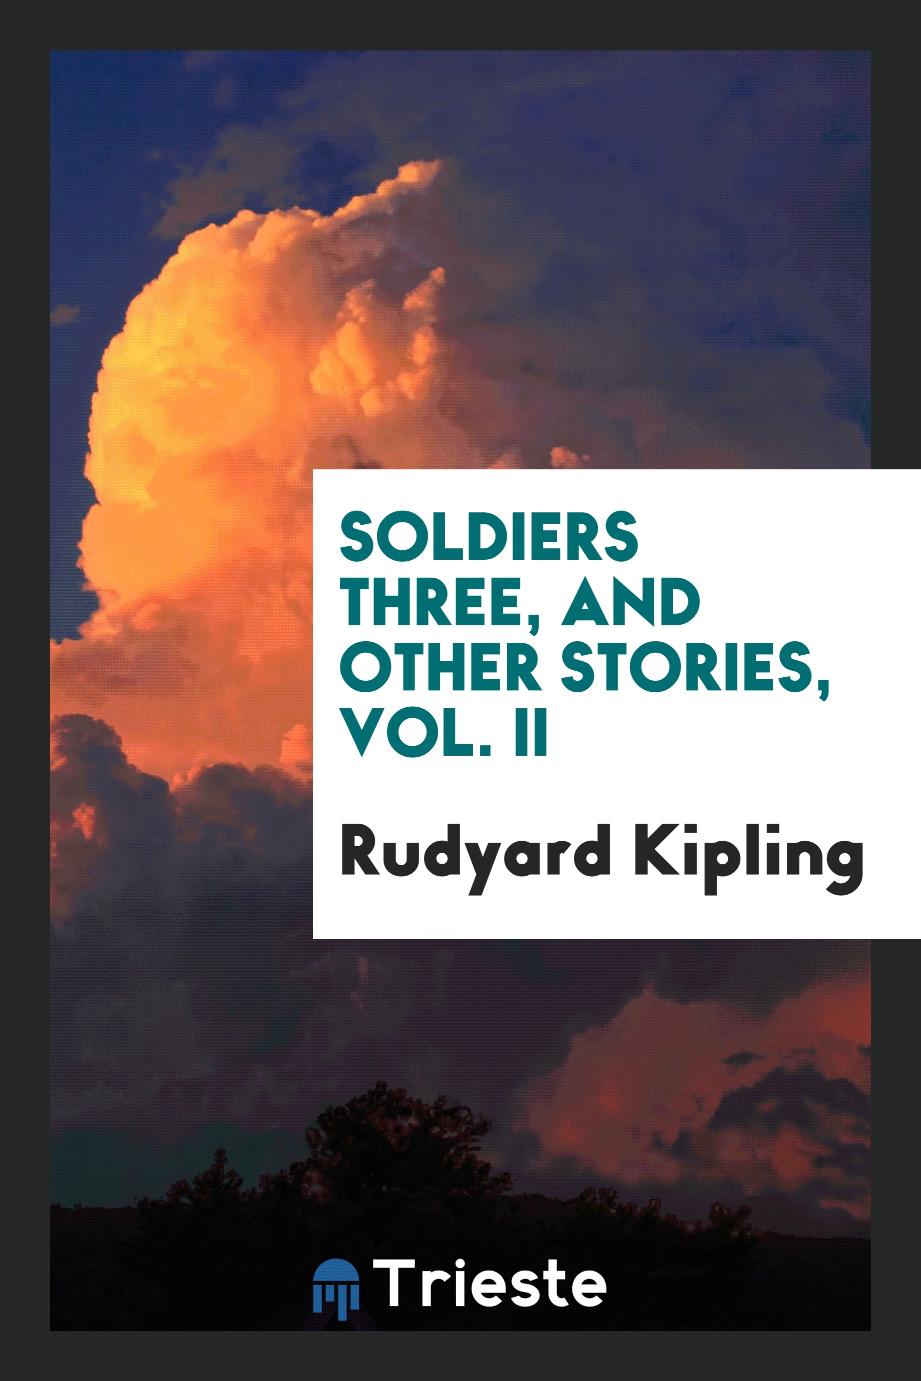 Soldiers three, and other stories, Vol. II